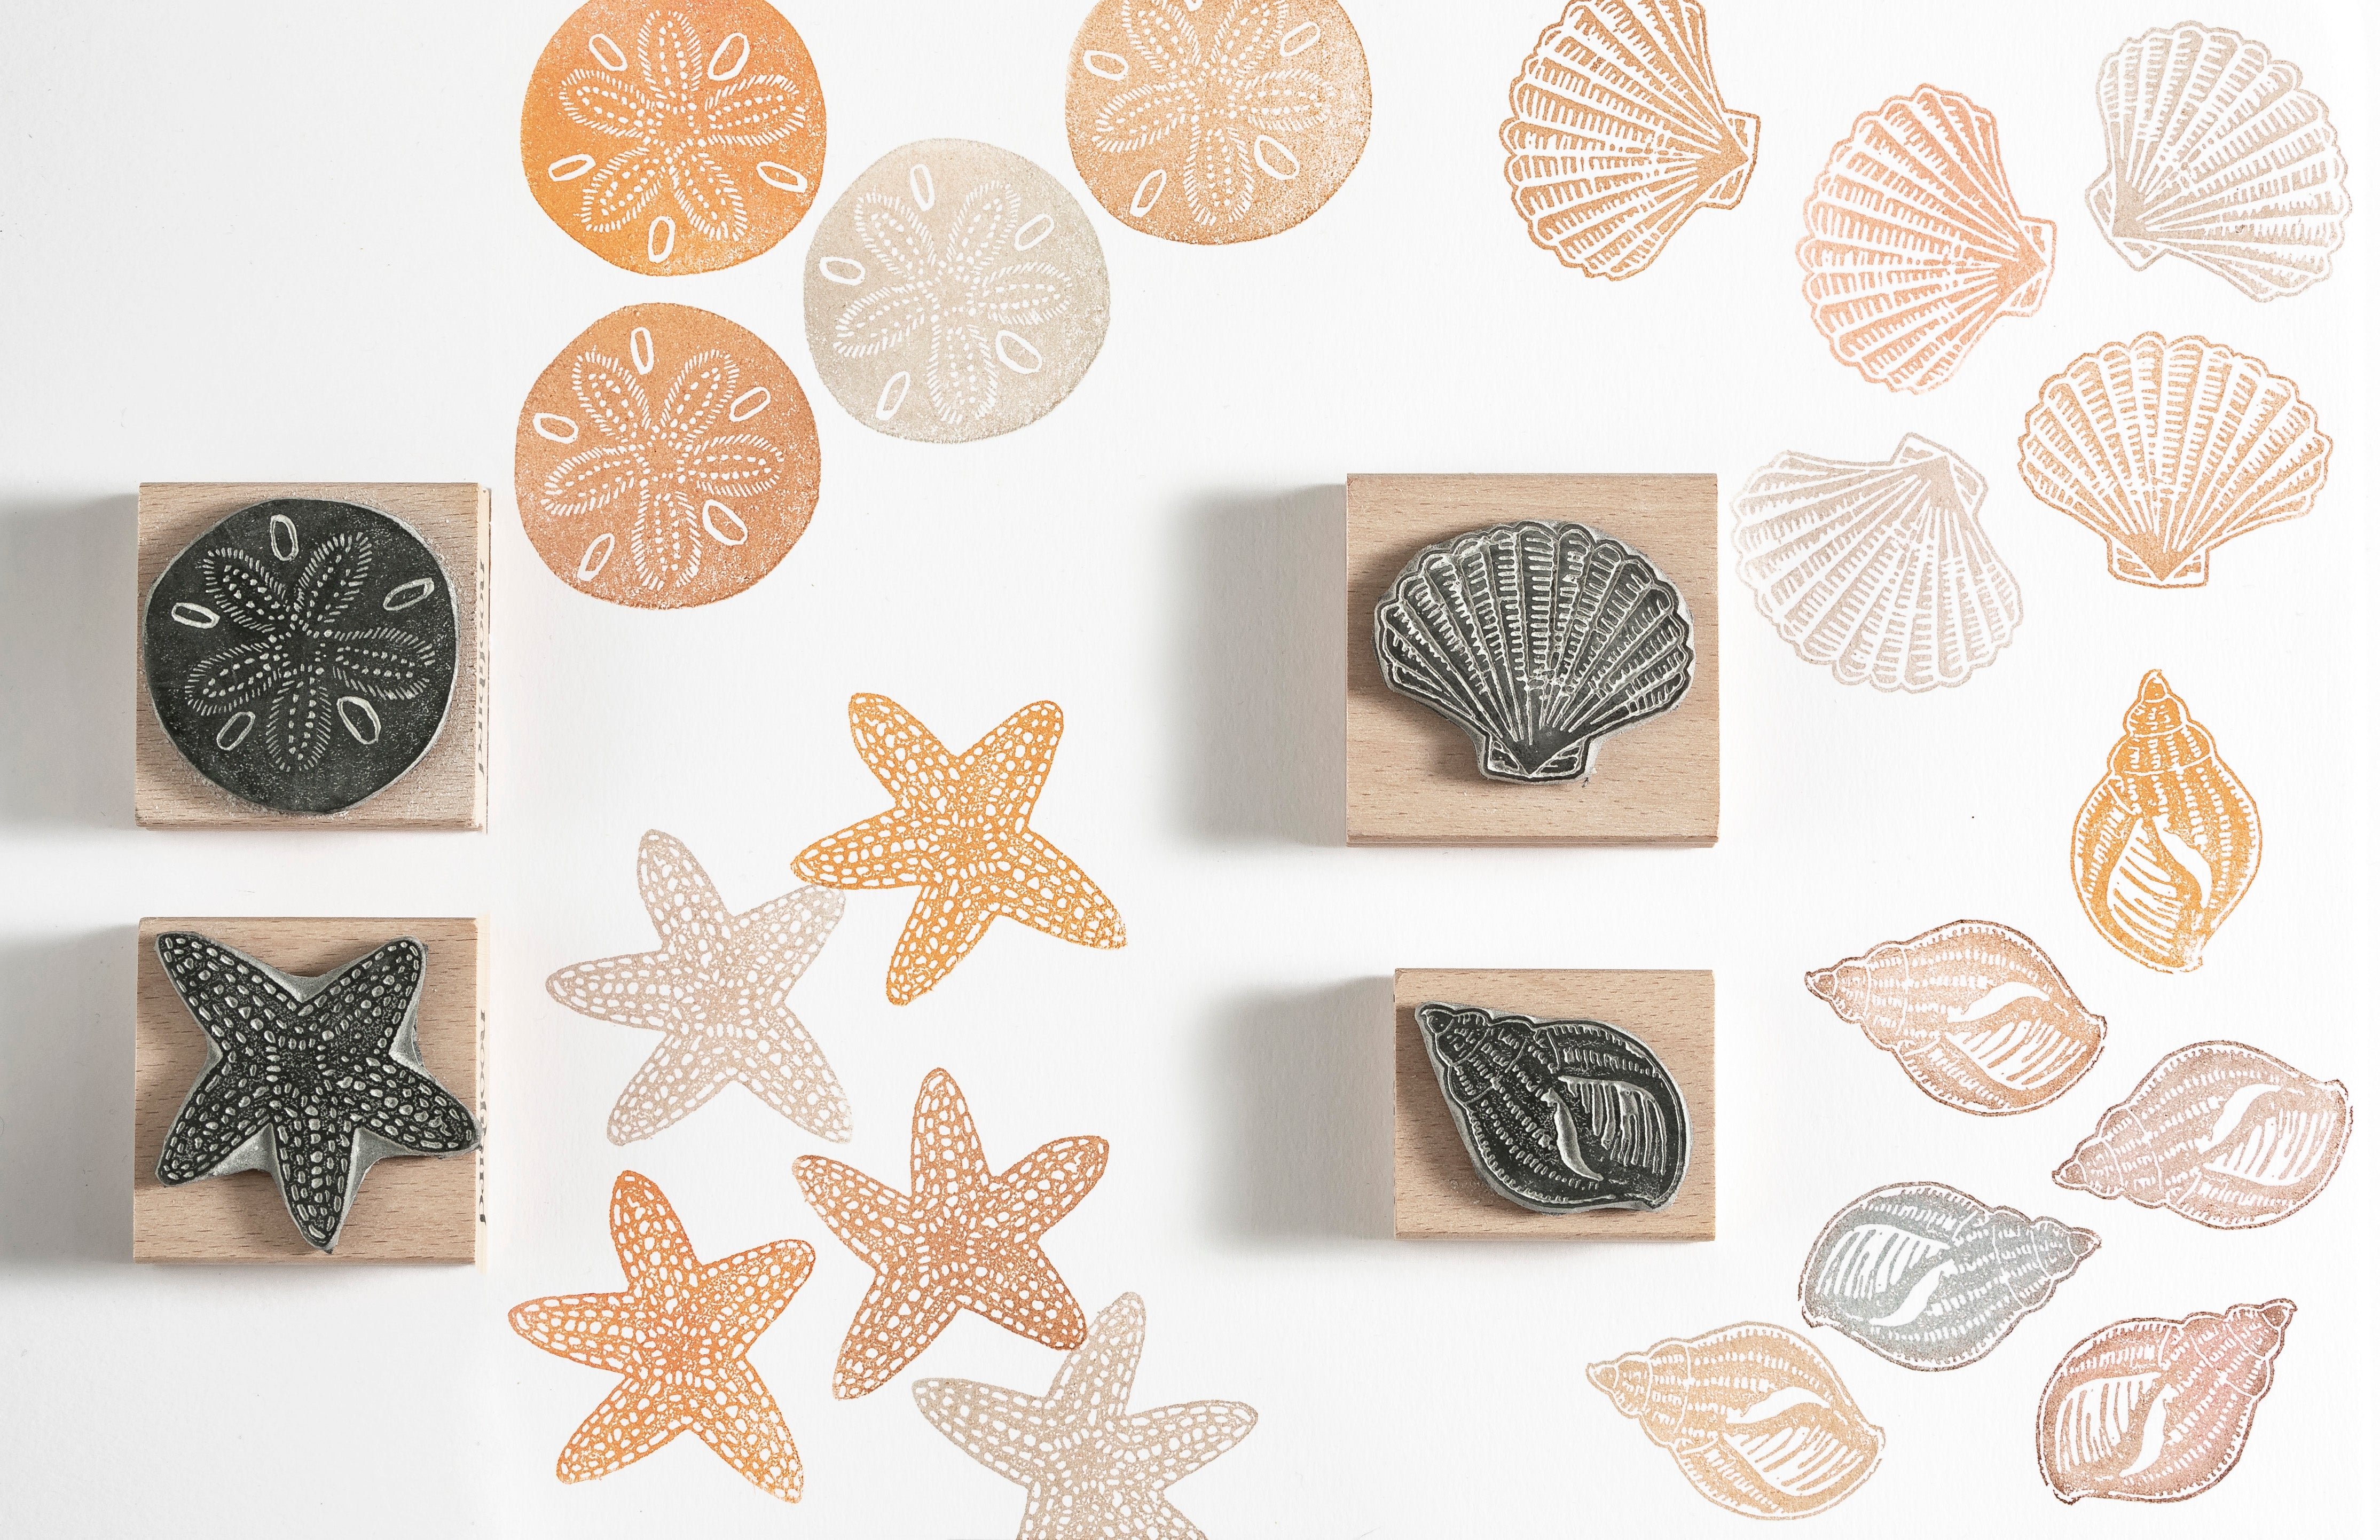 Shell, Starfish and Sand Dollar Rubber Stamps - Noolibird